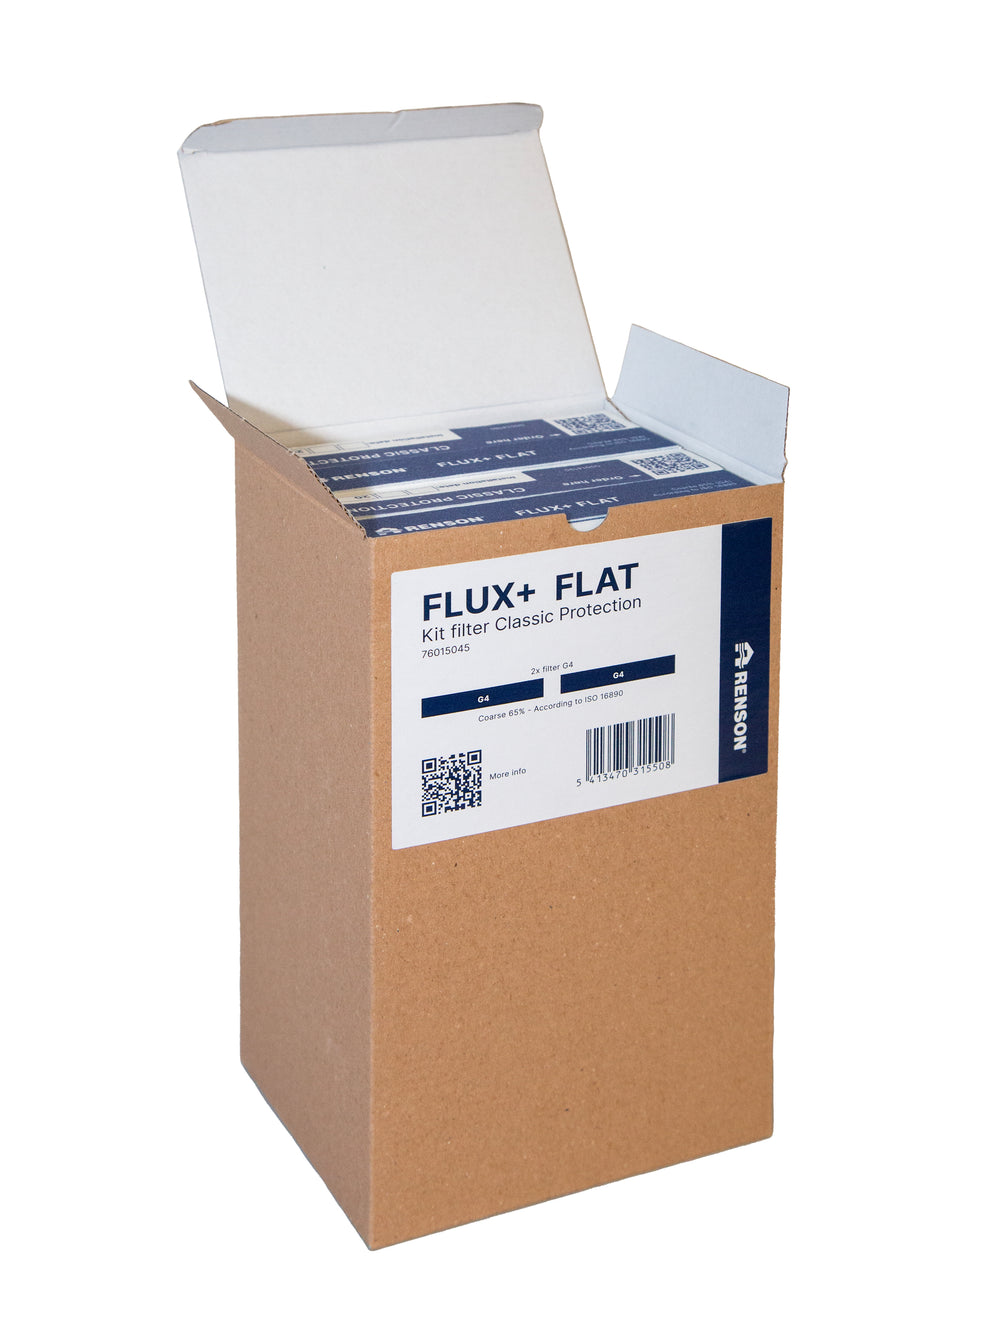 FLUX+ FLAT KIT: filter classic protection